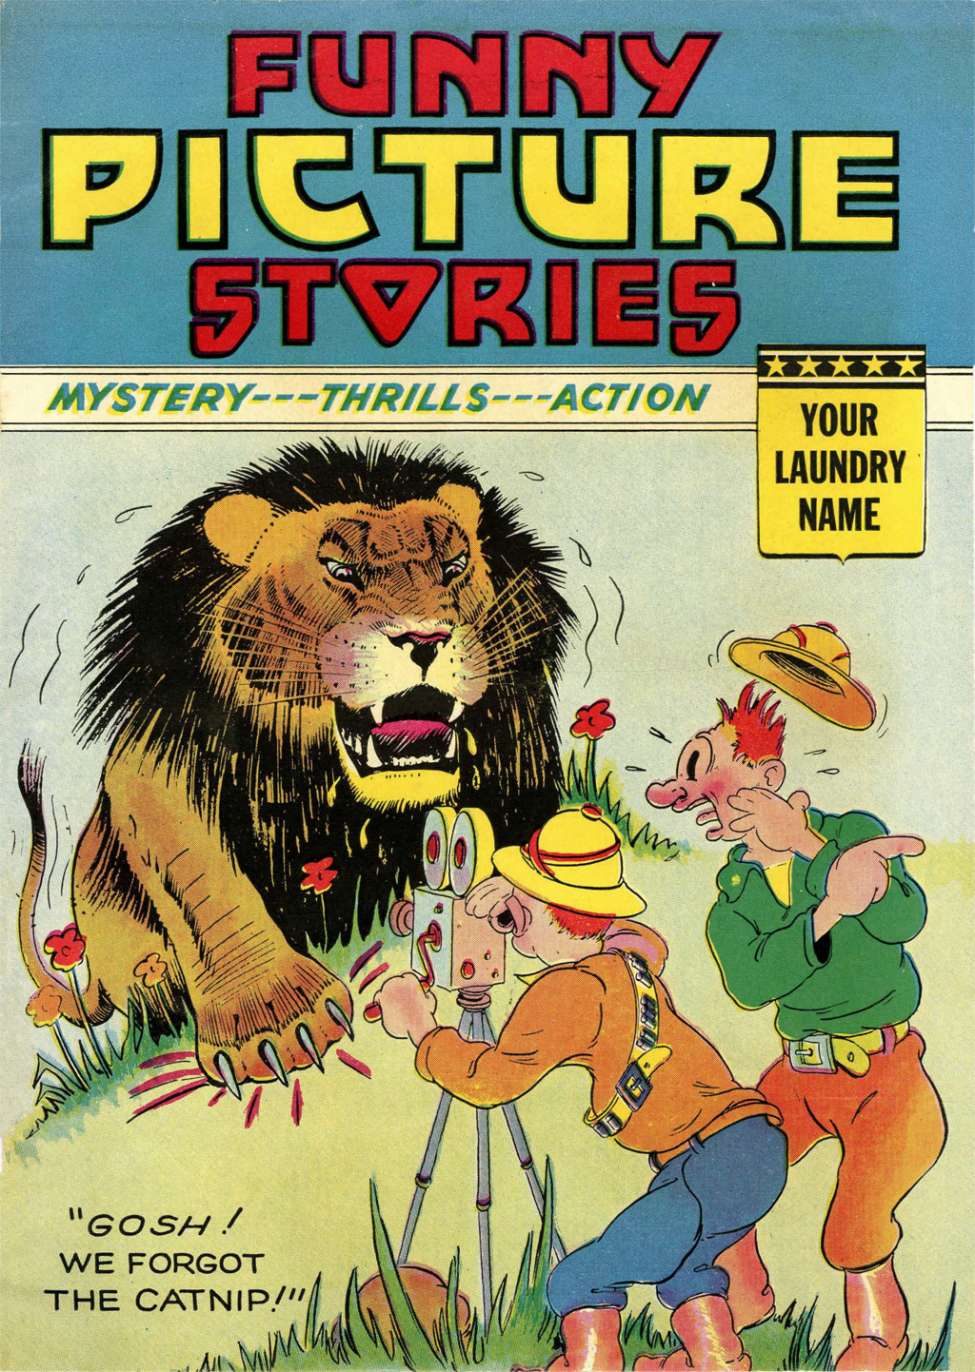 Book Cover For Funny Picture Stories v2 7